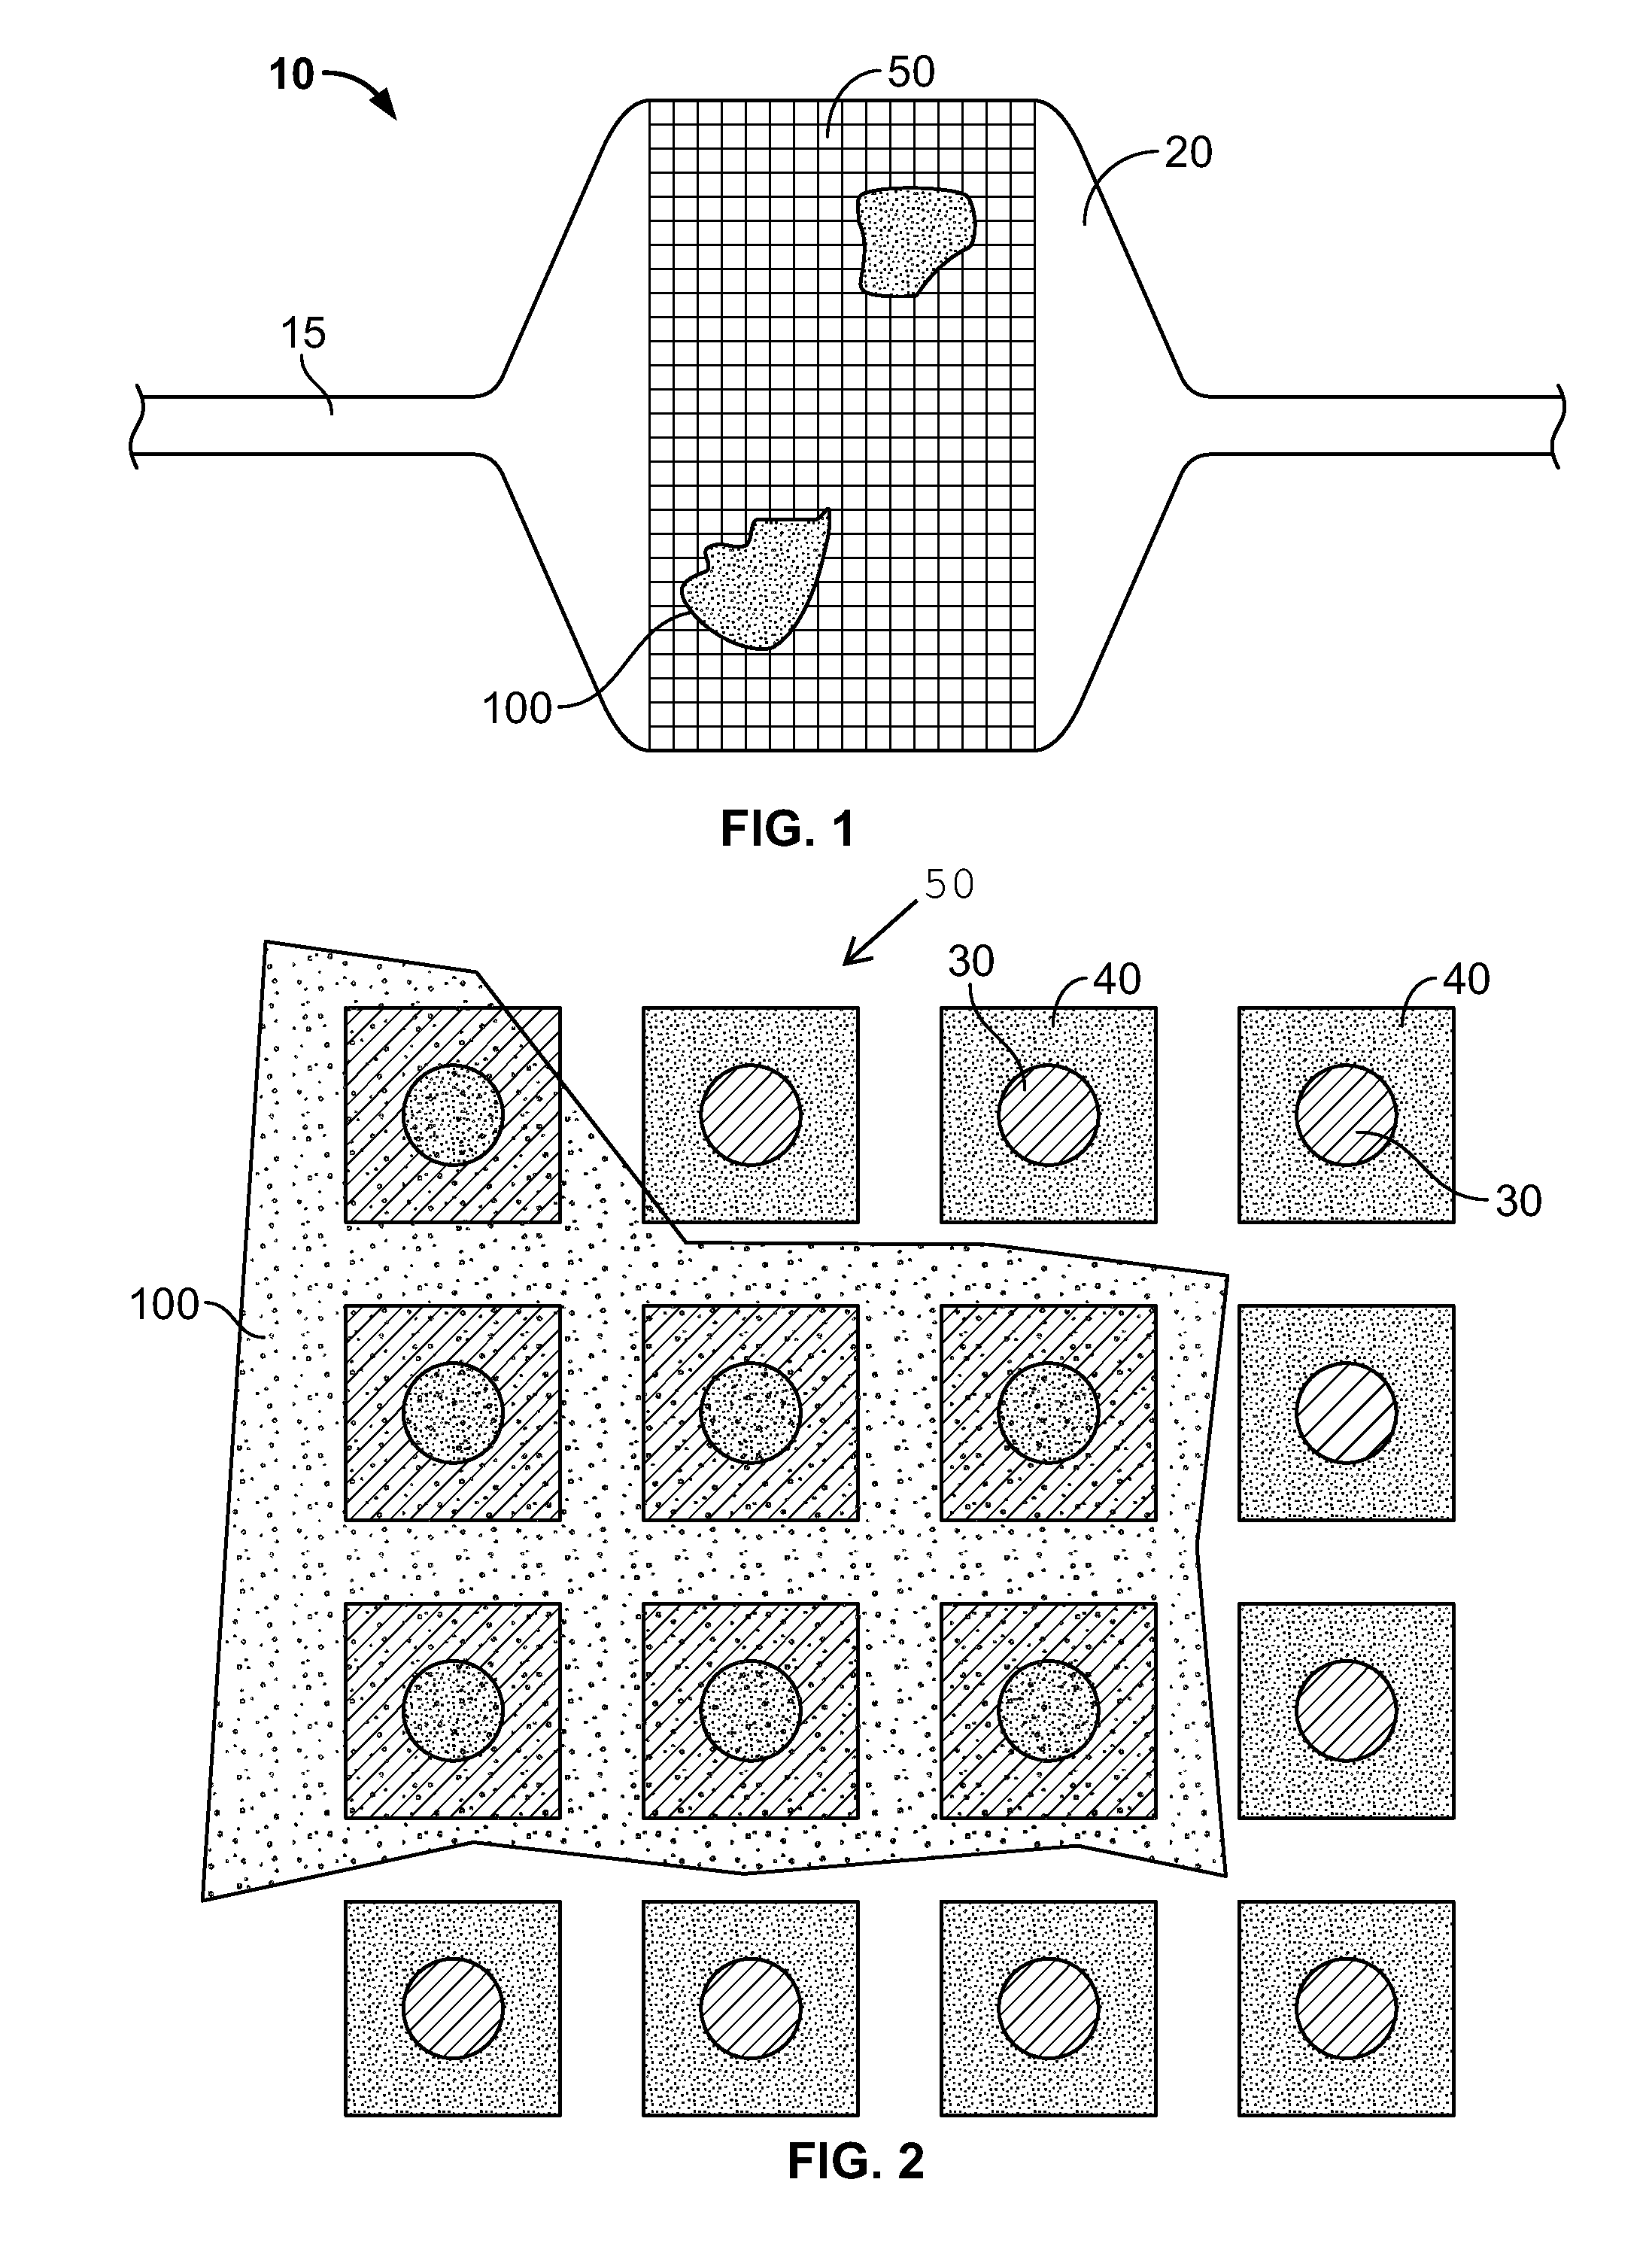 Delivery device for localized delivery of a therapeutic agent